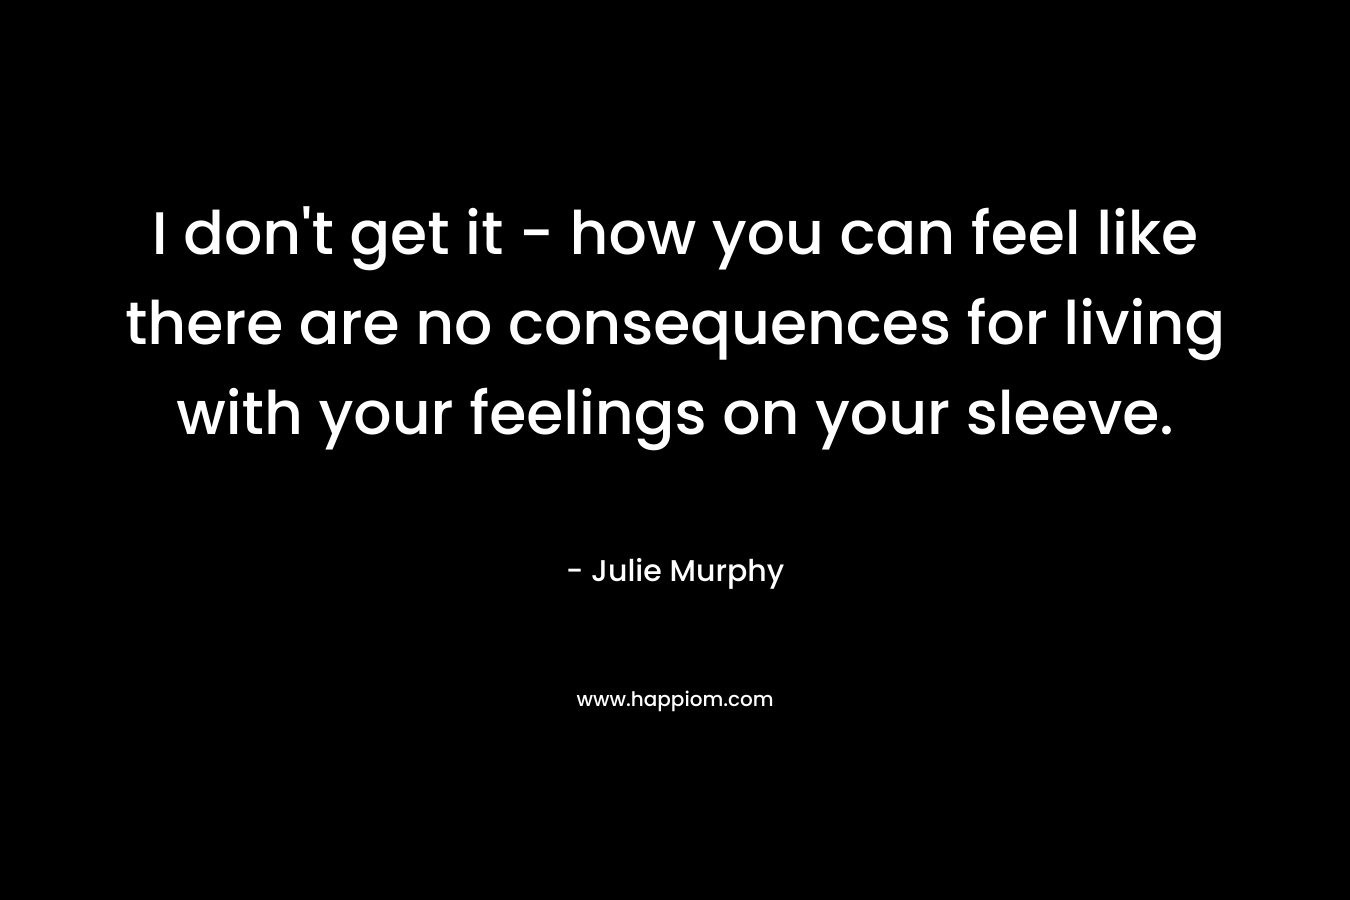 I don't get it - how you can feel like there are no consequences for living with your feelings on your sleeve.